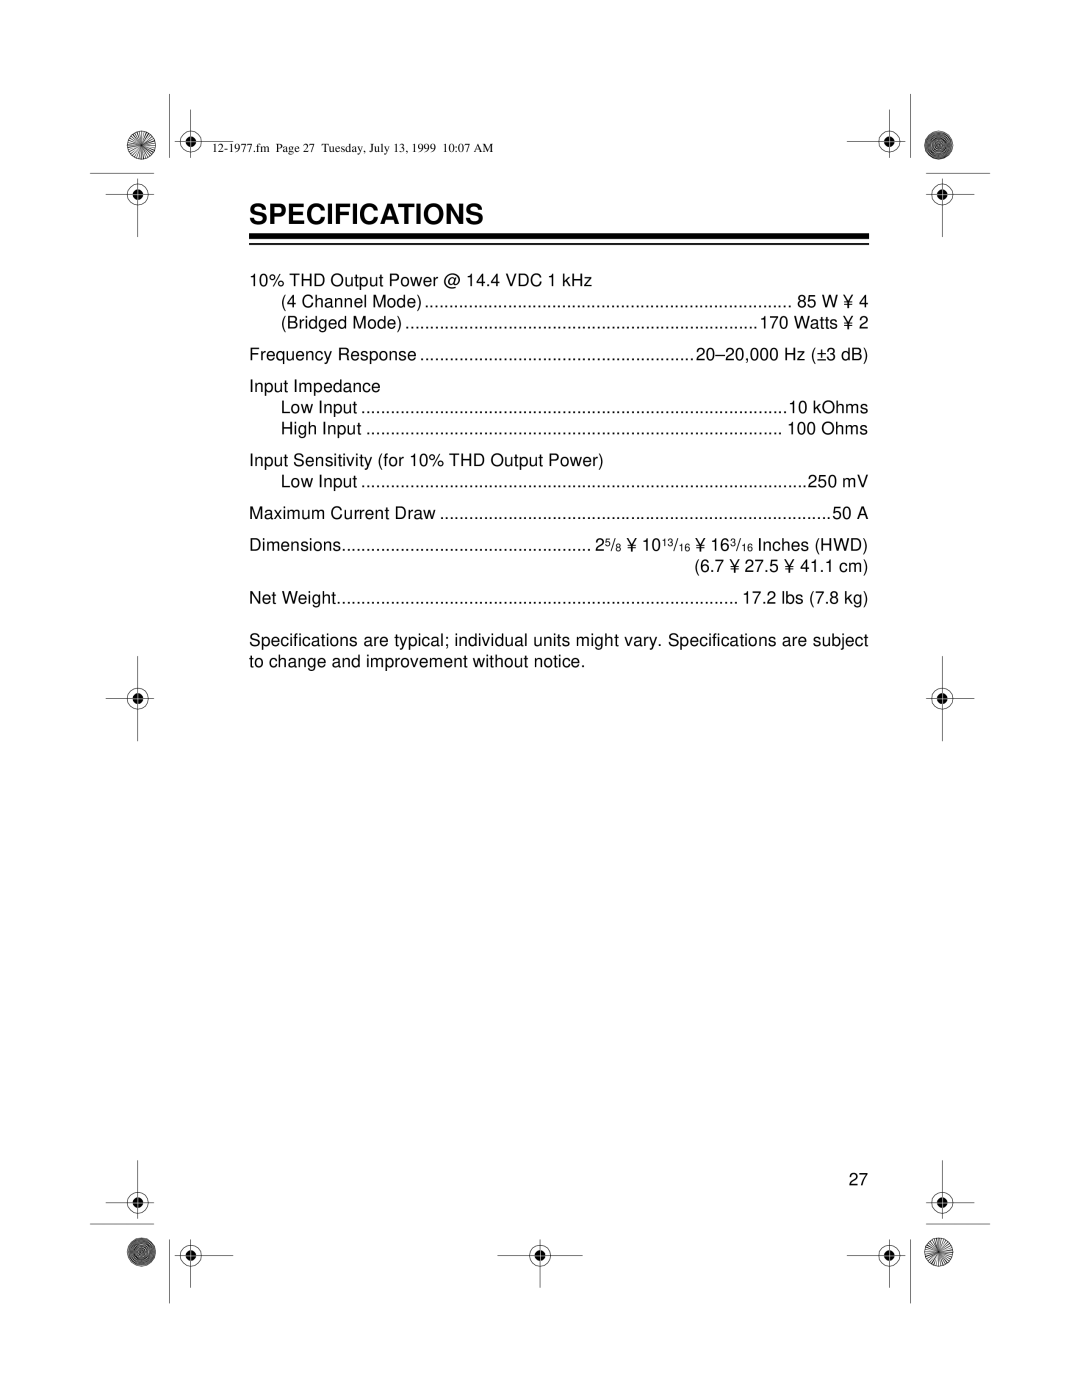 Radio Shack 85 owner manual Specifications 